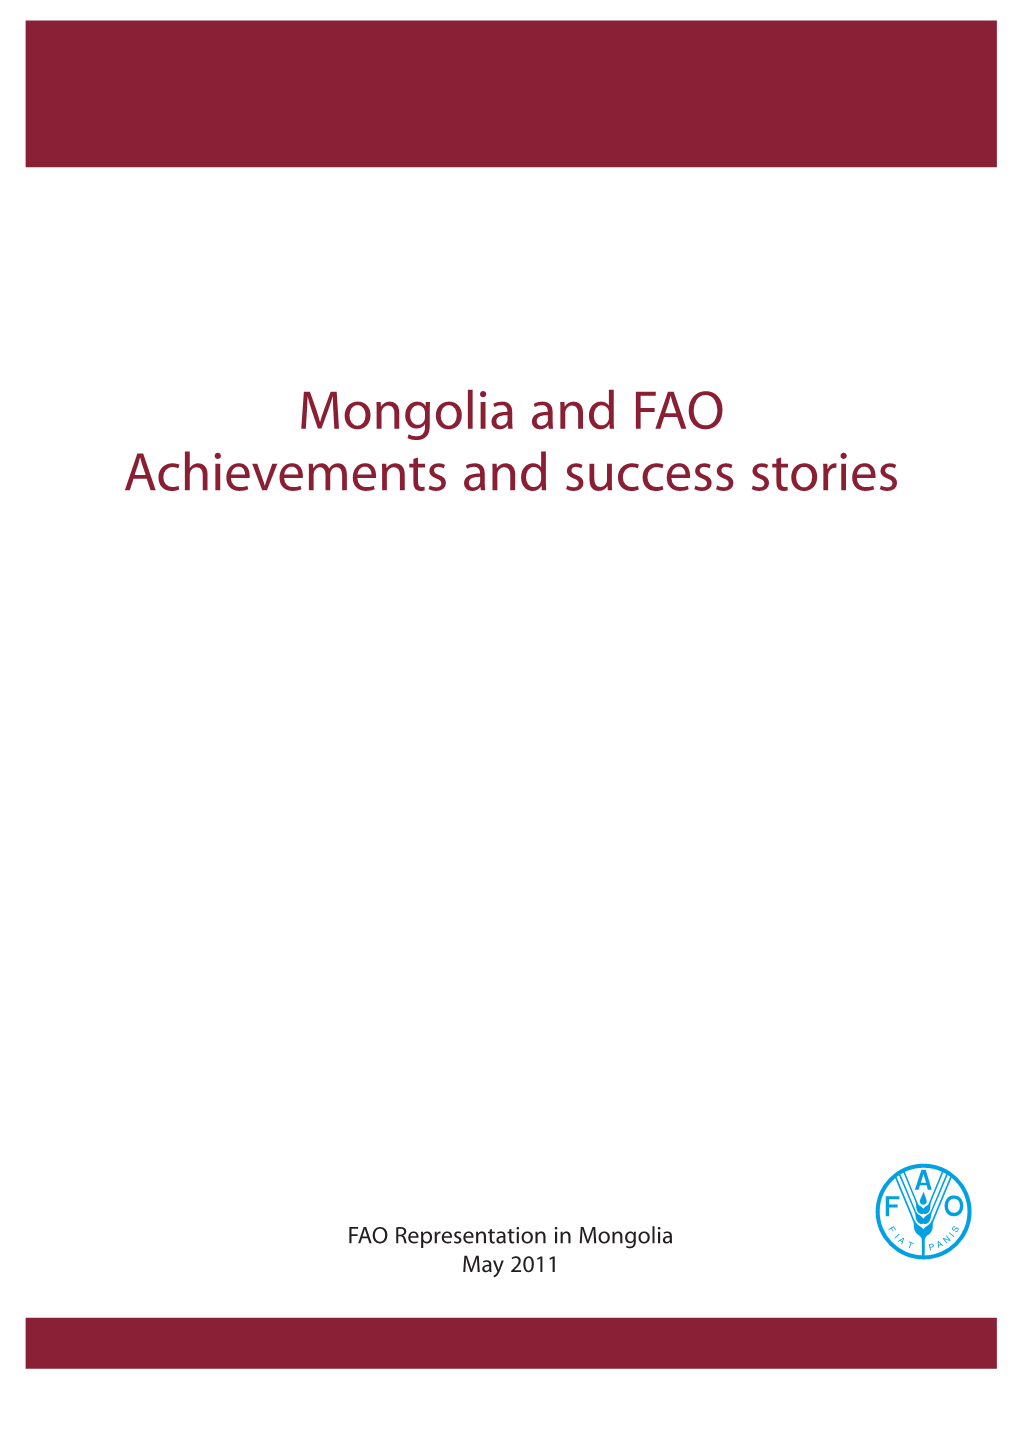 Mongolia and FAO Achievements and Success Stories